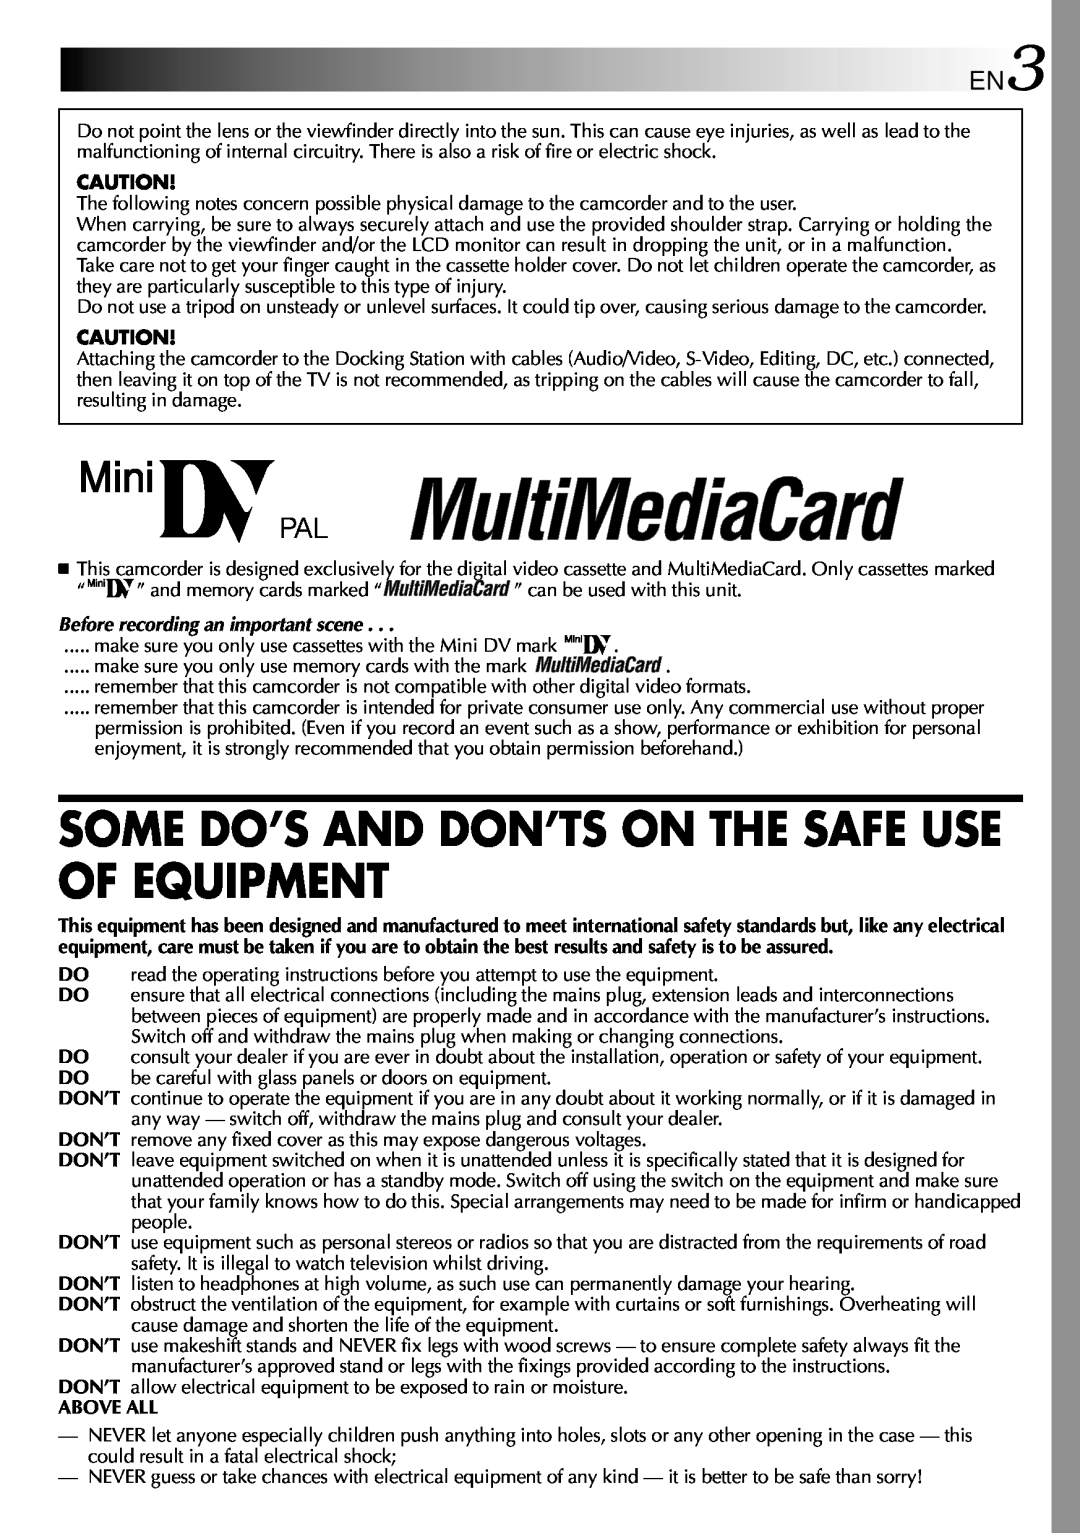 JVC GR-DVX10 specifications Some Do’S And Don’Ts On The Safe Use Of Equipment, Above All 